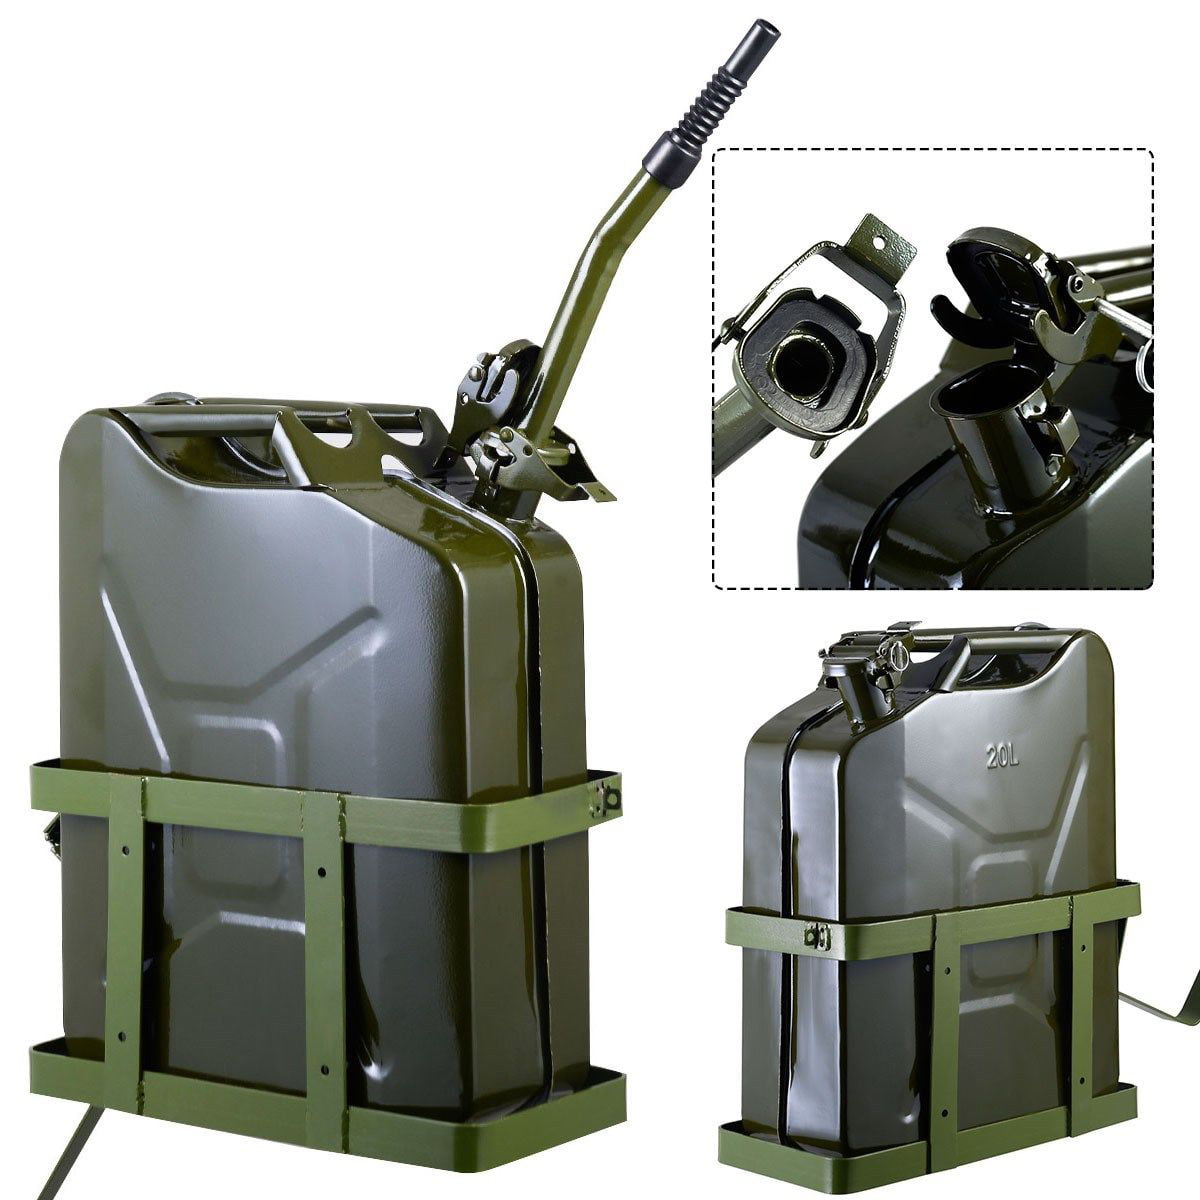 8pcs Jerry Can 20l 5 Gallon Backup Steel Tank Fuel Gasoline Military Green for sale online